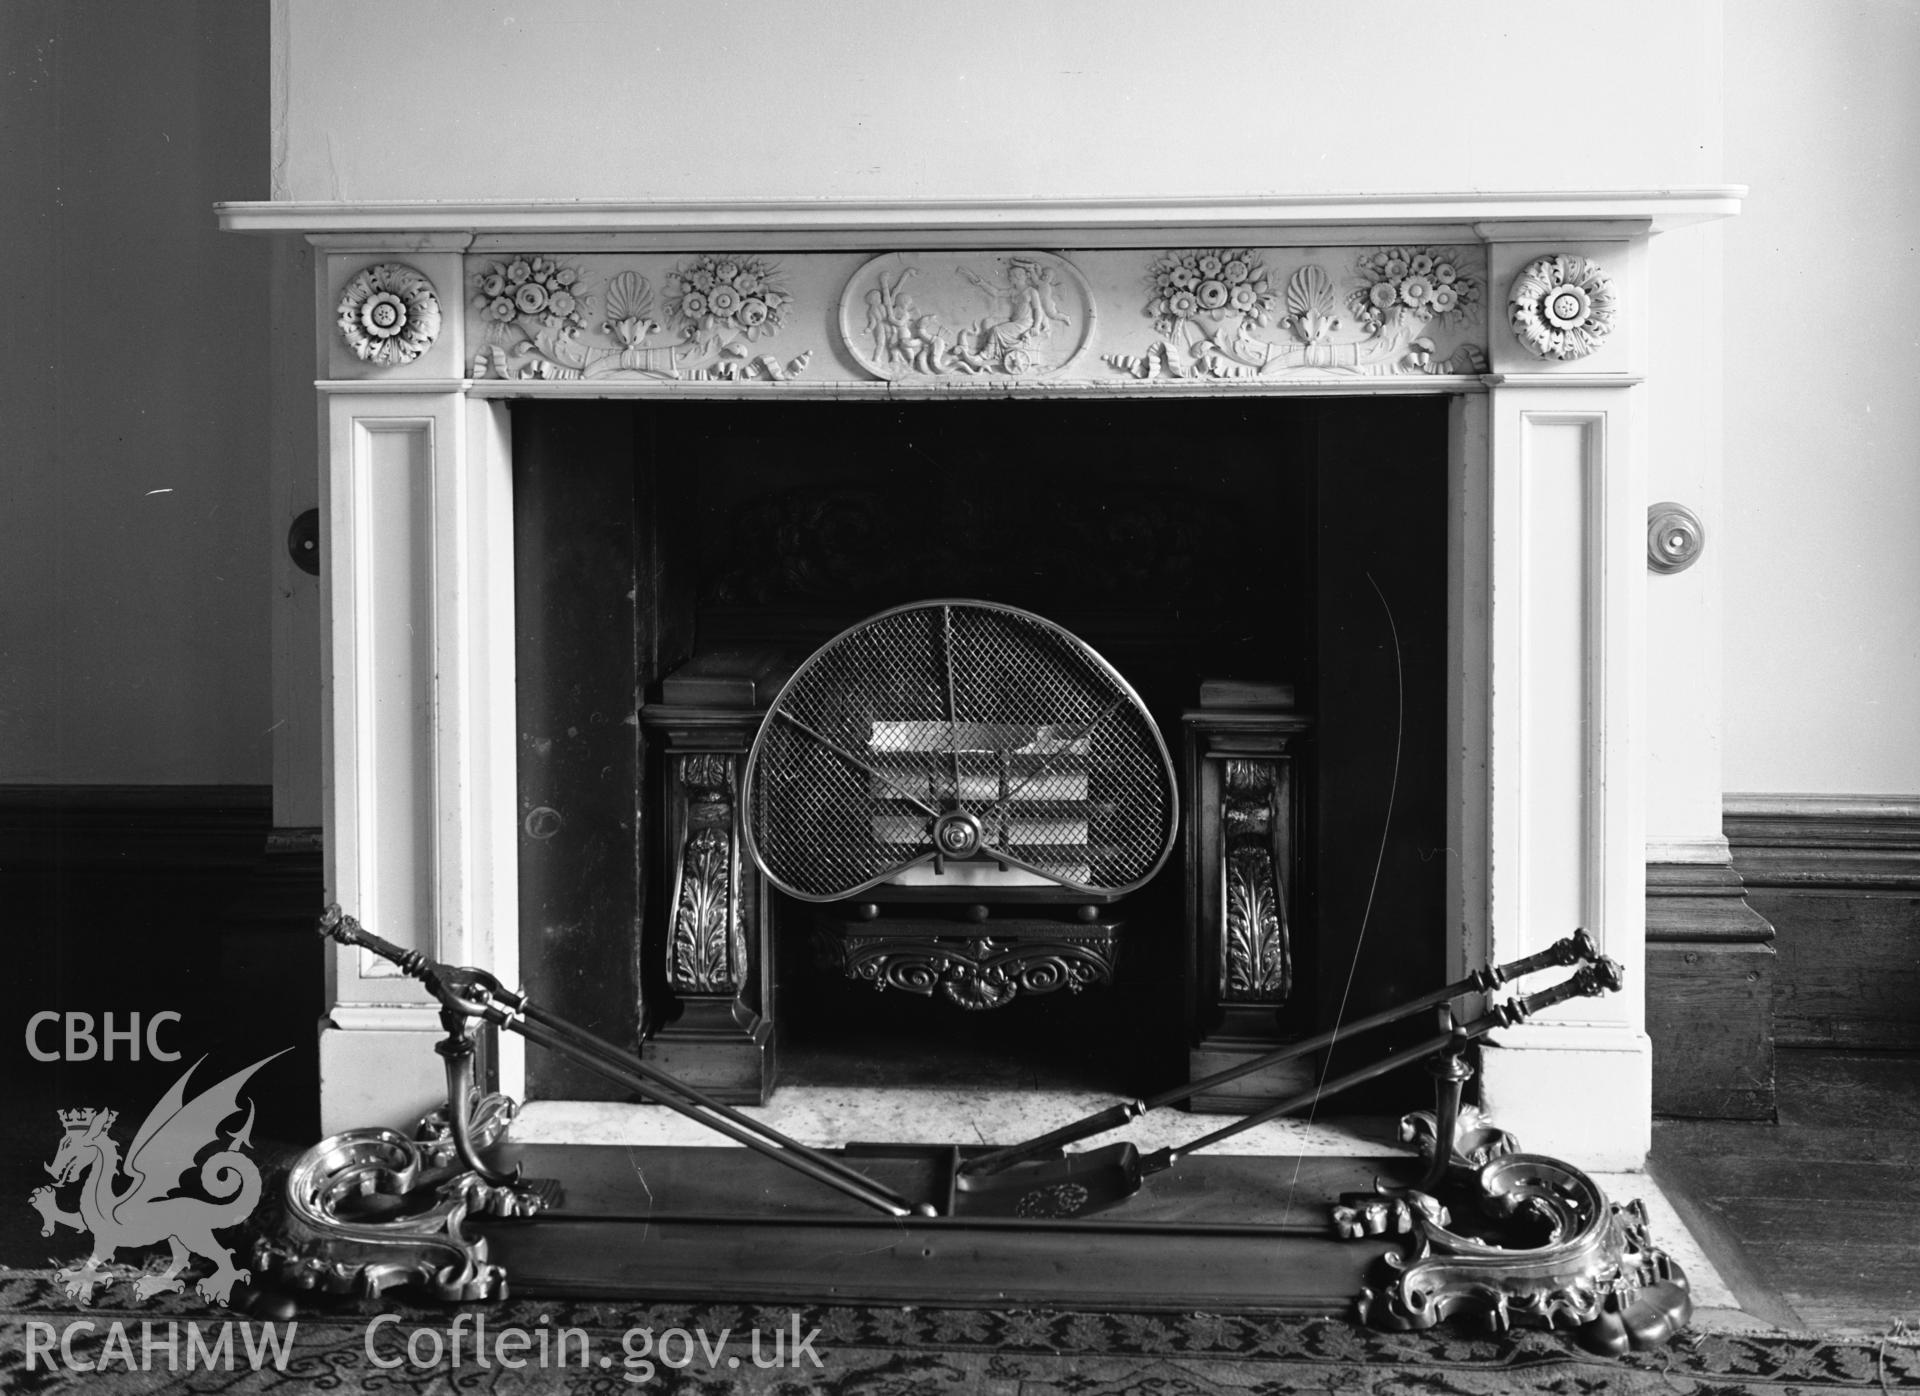 Interior view showing fireplace in entrance hall at Glynllifon Hall